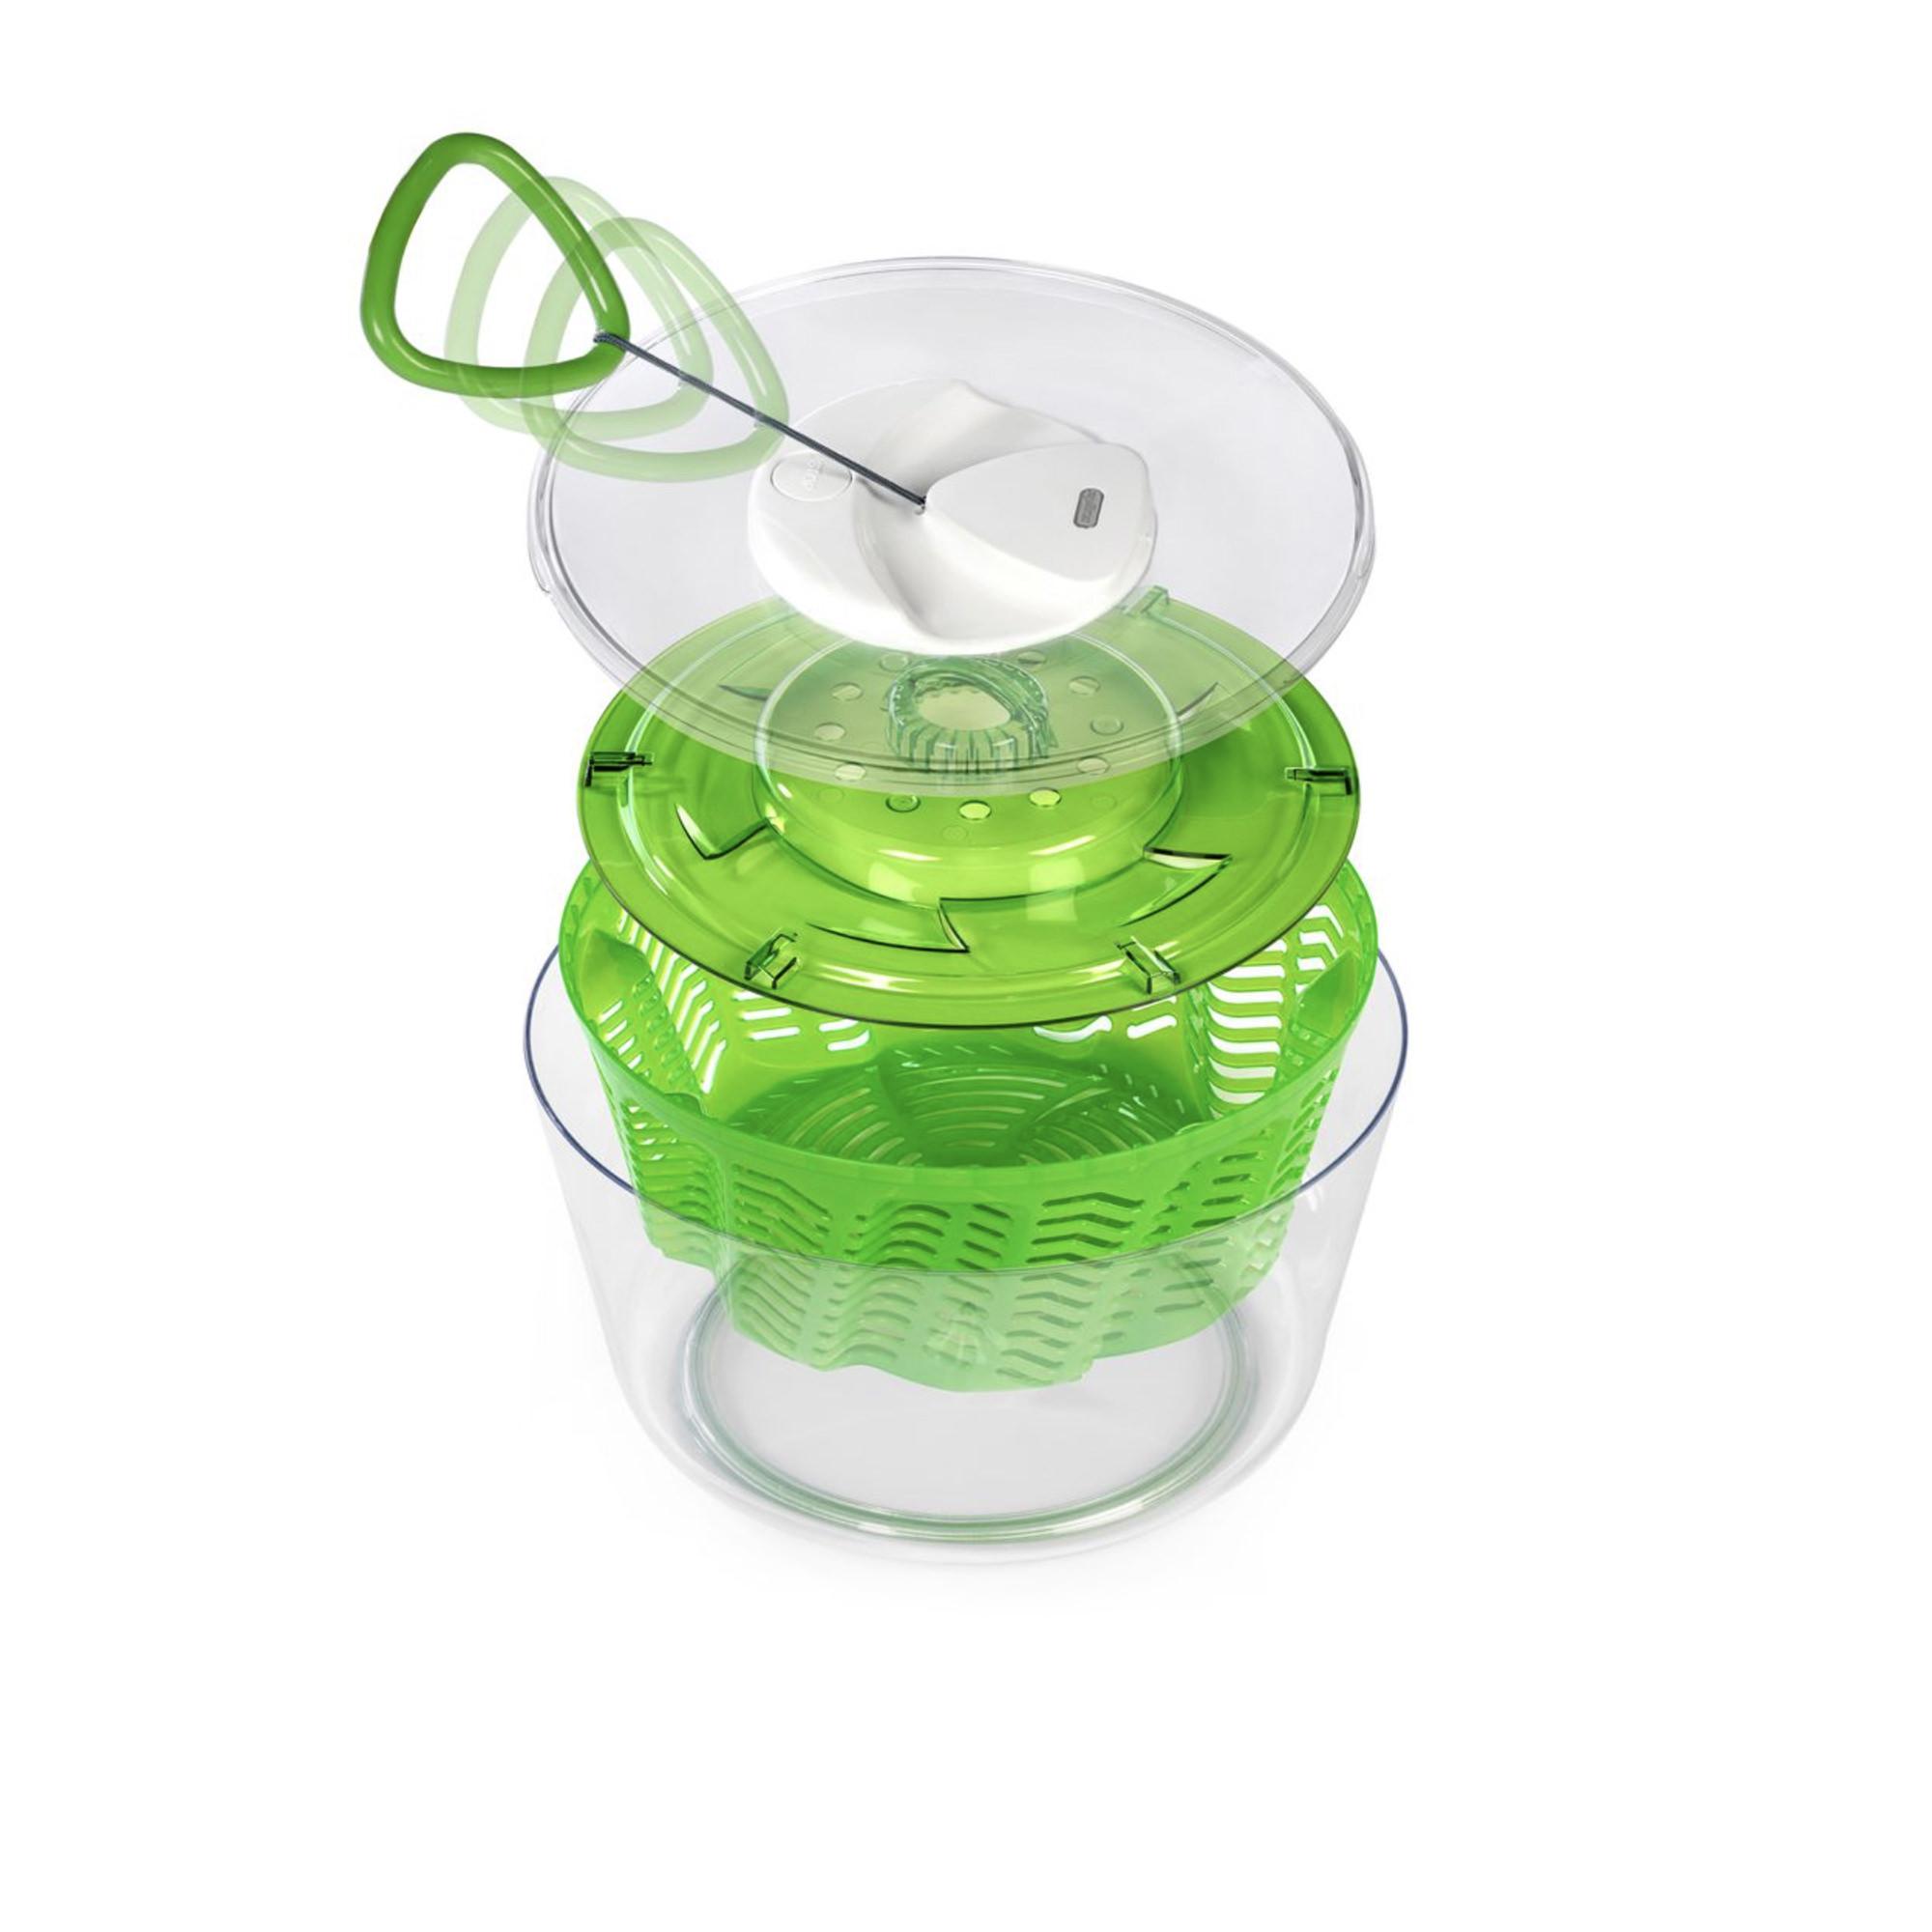 Zyliss Easy Spin 2 Salad Spinner Small Green Image 3